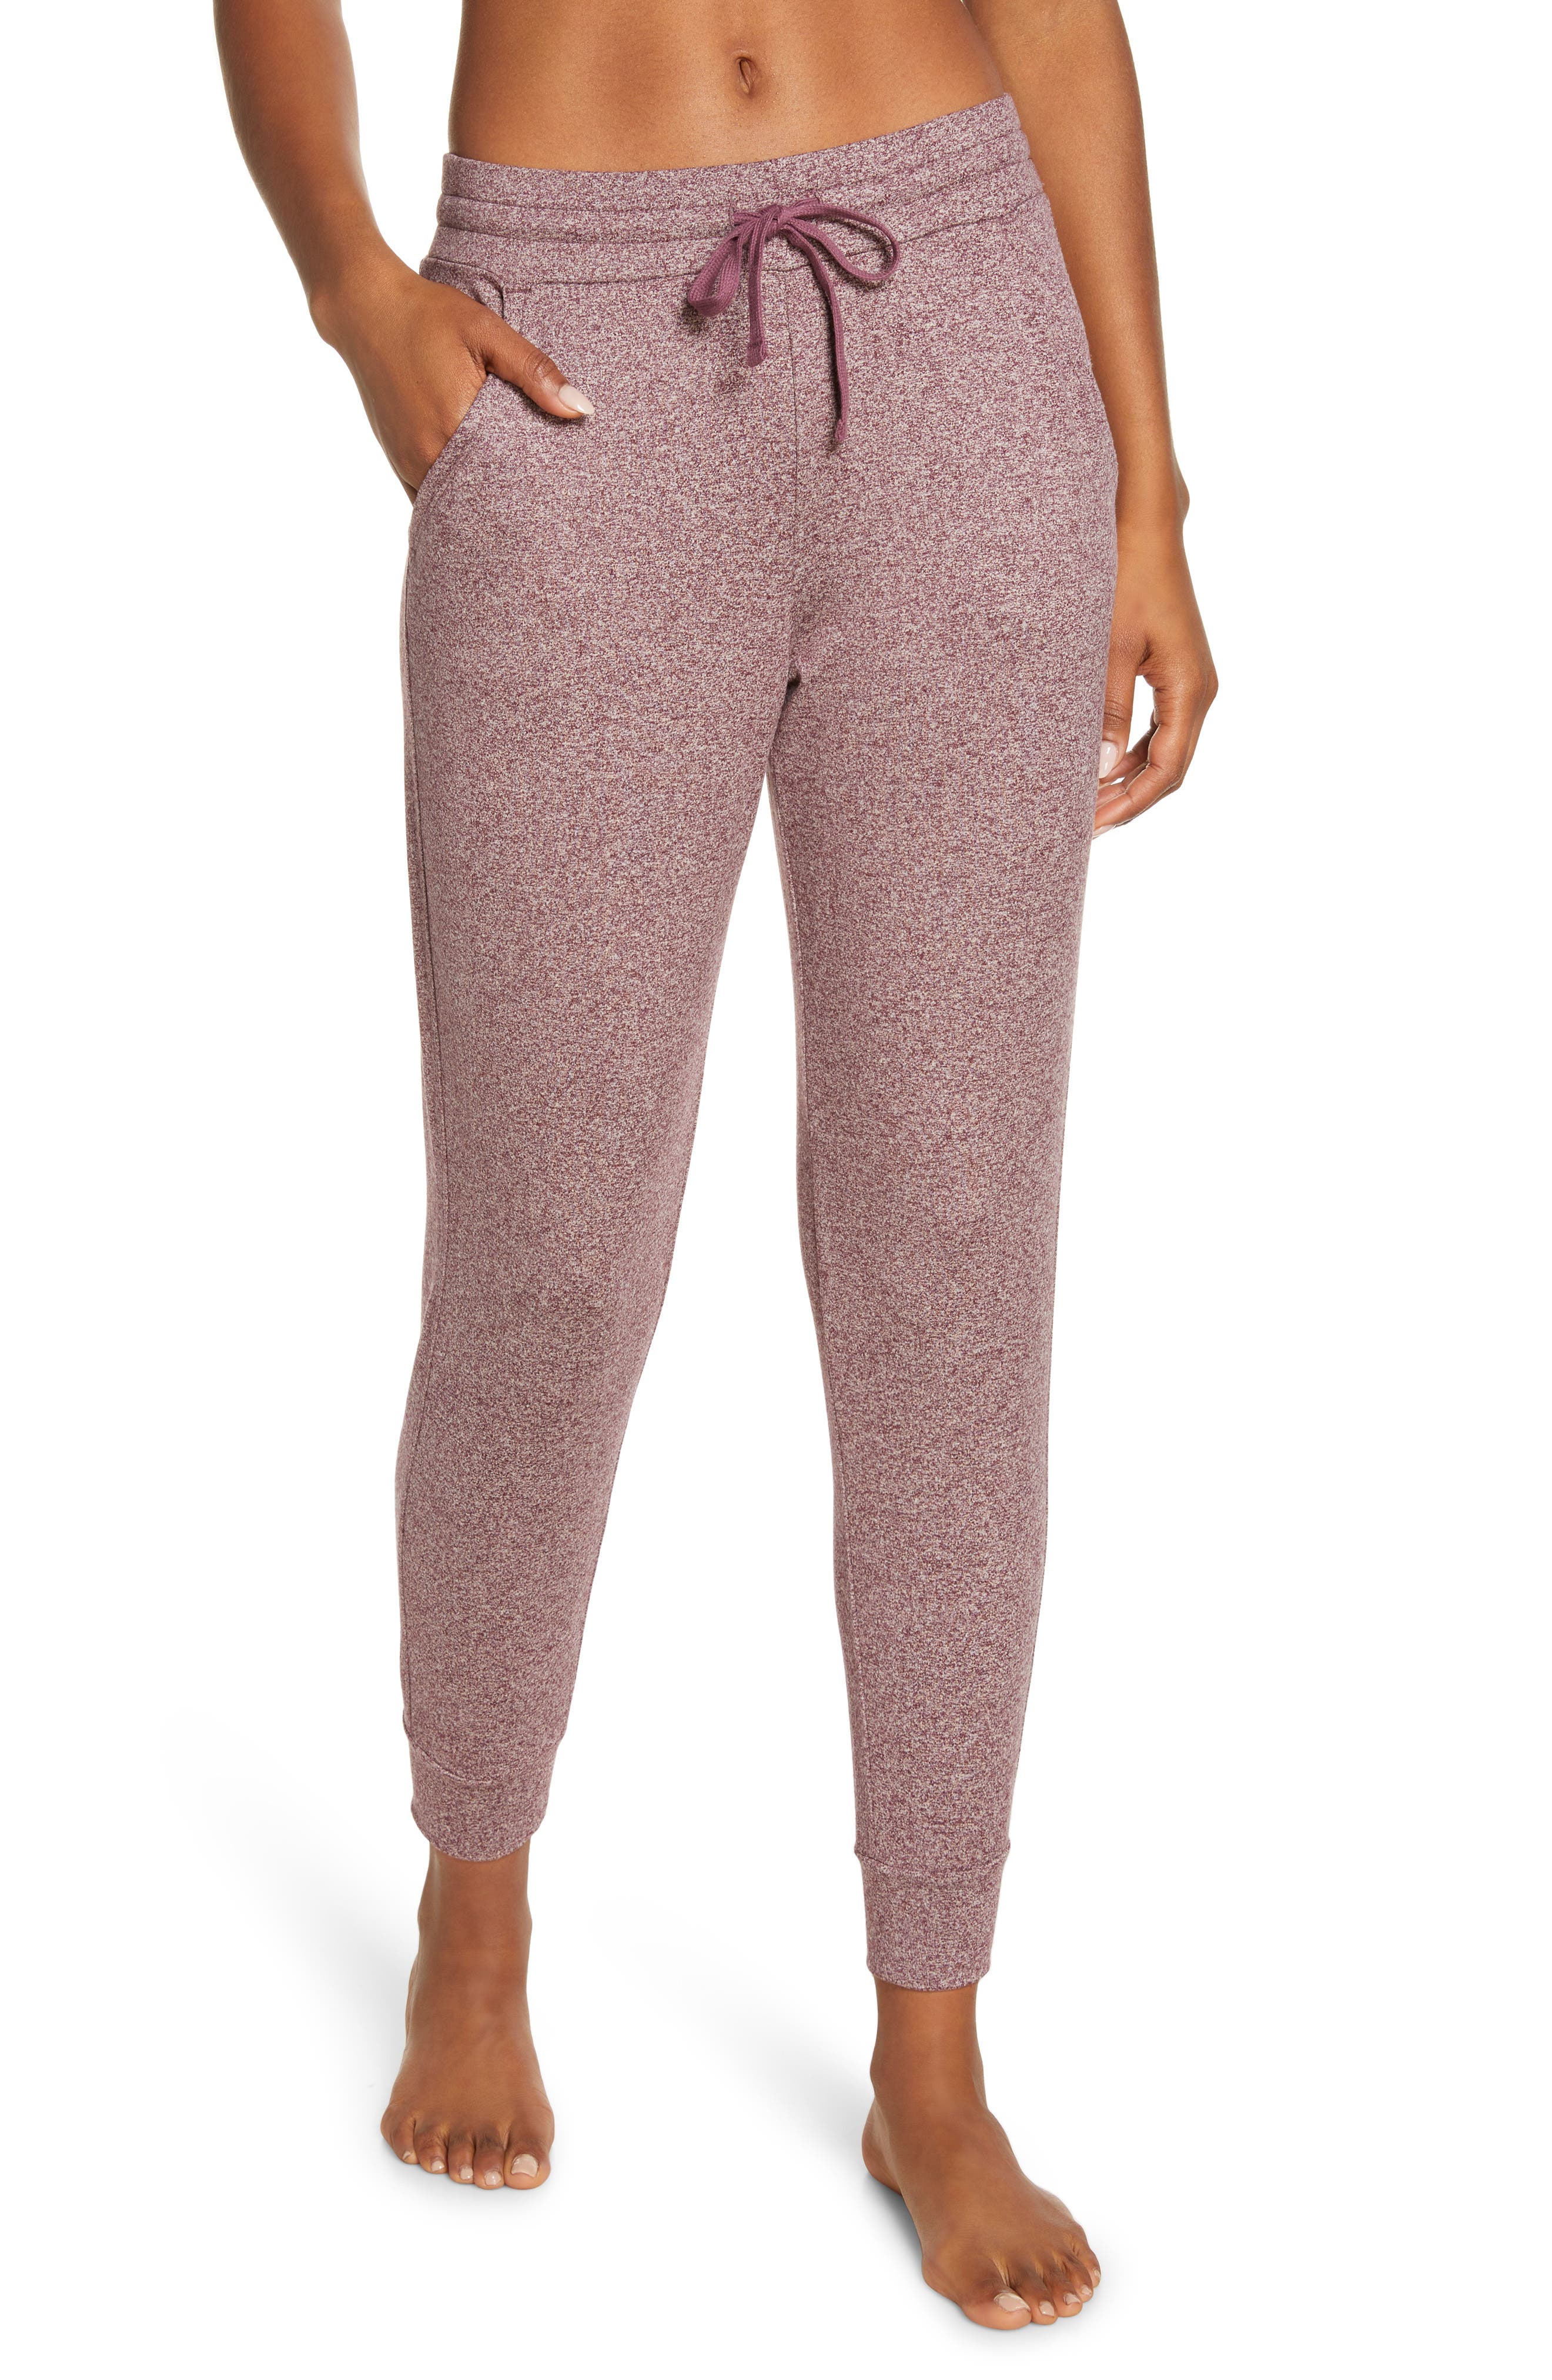 Baggy Sweatpants for Women Comfy Jogger Track Pants for Ladies Eoselio Loungewear 